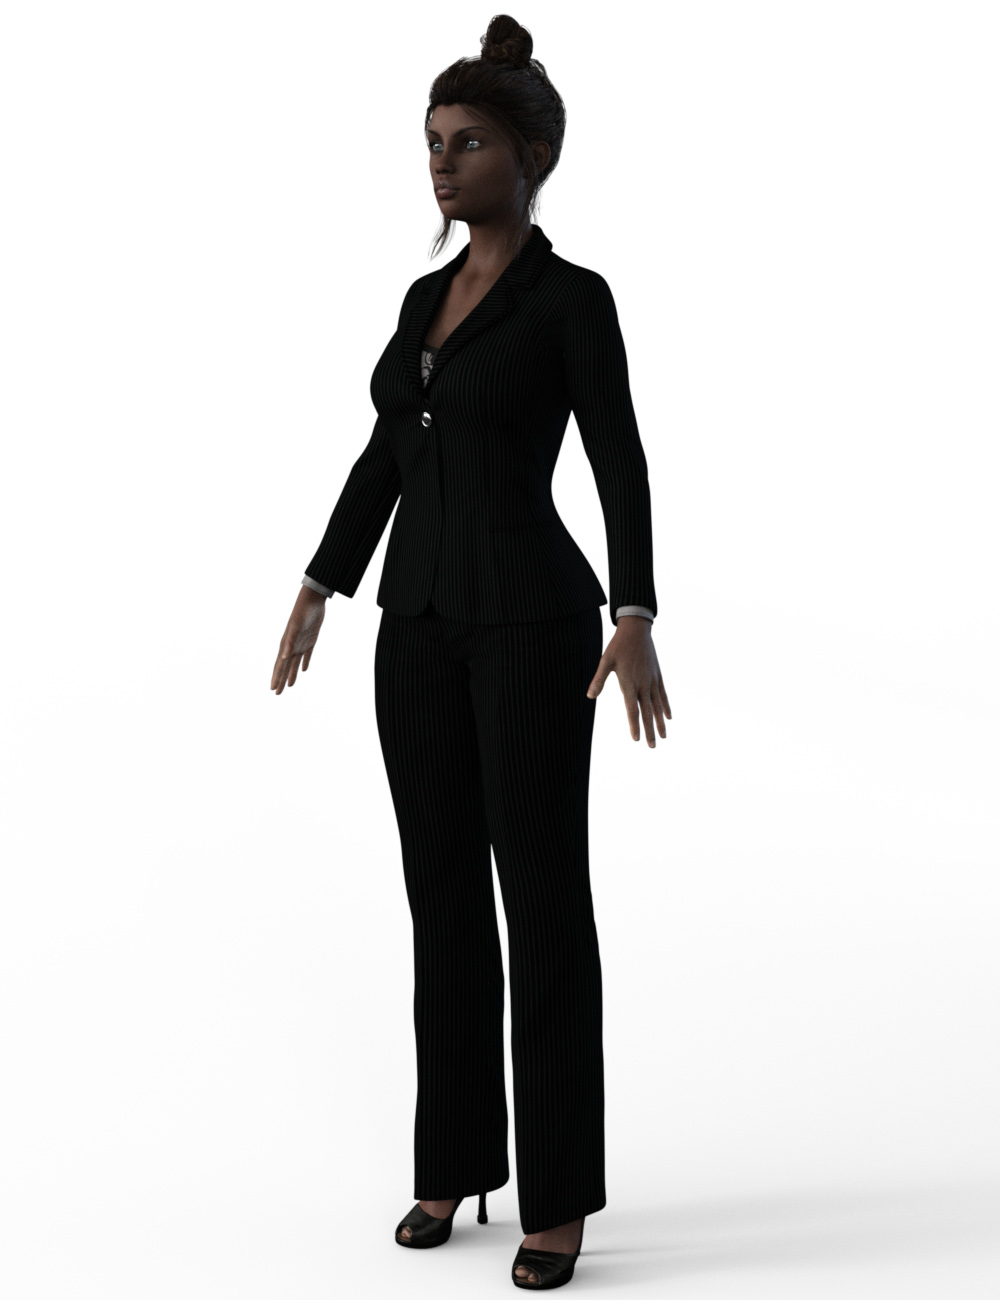 FBX- Lynsey New York Business Outfit by: Paleo, 3D Models by Daz 3D